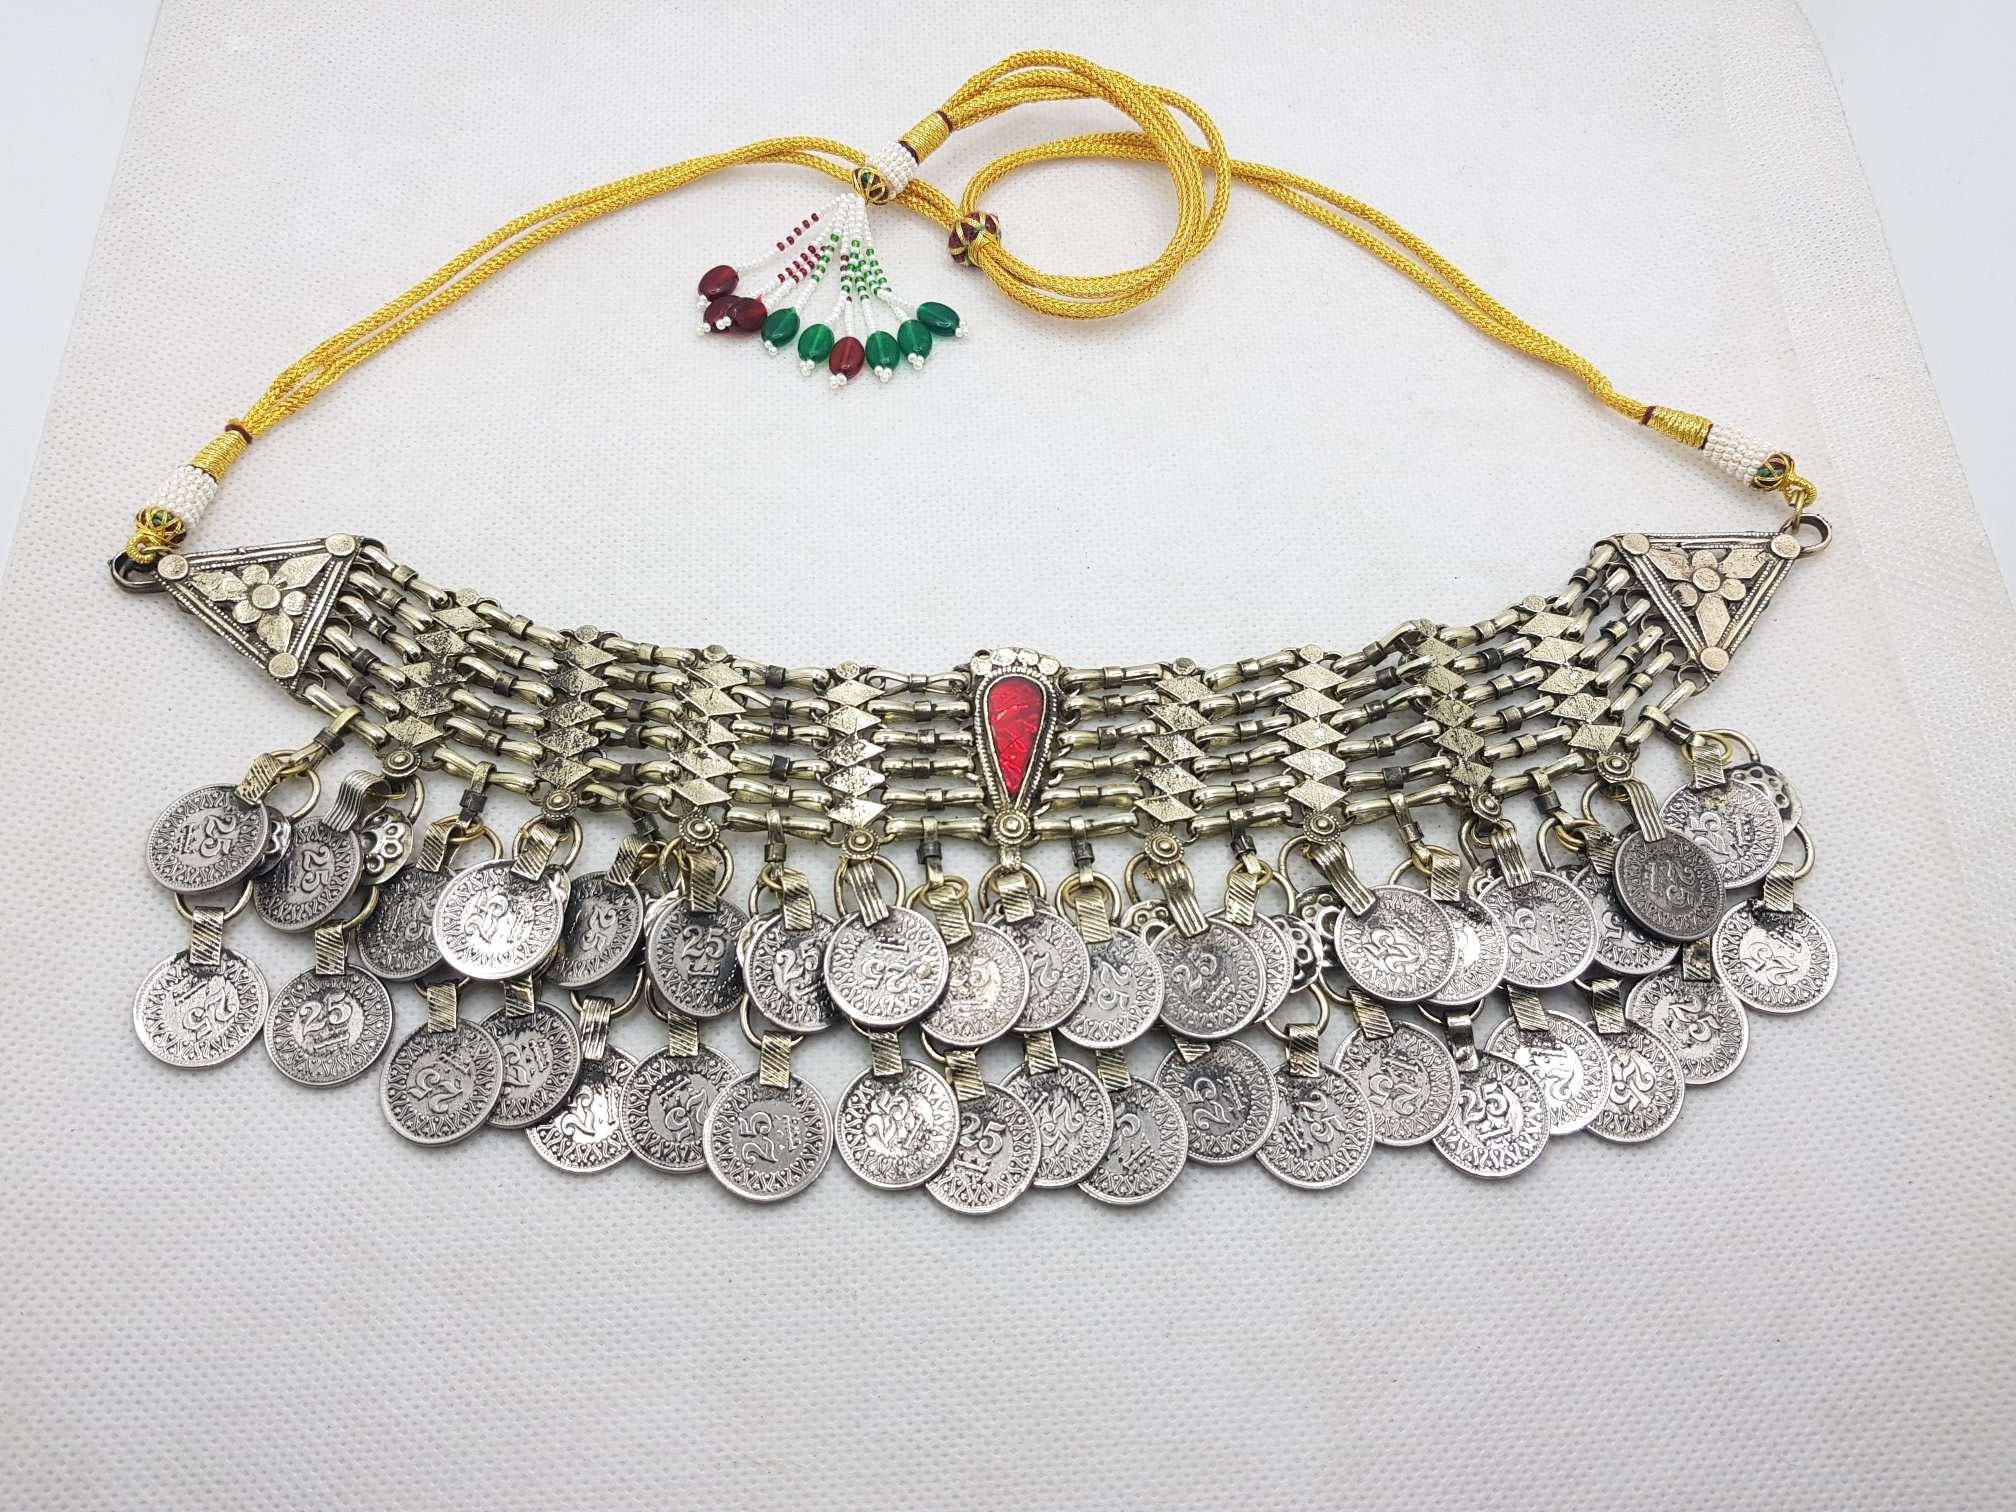 Wholesale Coins Necklaces, Afghan Vintage Coins Chokers Necklaces, Vintage Bulk  Necklaces, Coins Necklace at Wholesale Price 